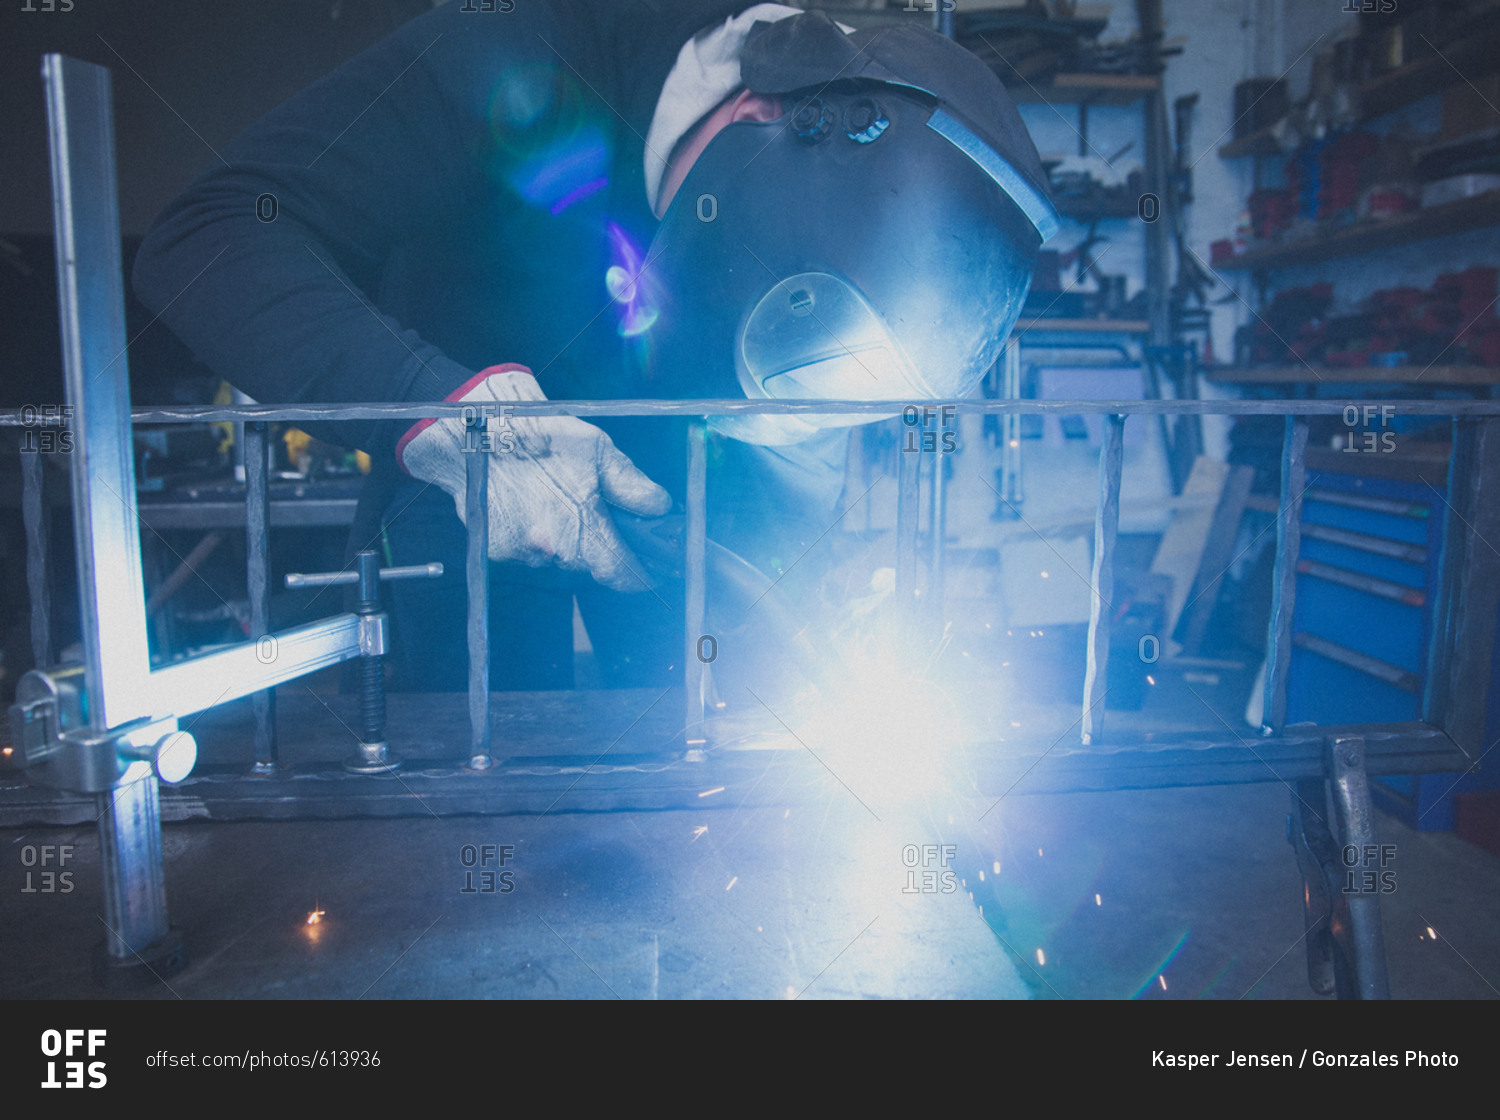 A blacksmith wears safety gear and is welding a metal construction in a metalsmith\'s workshop